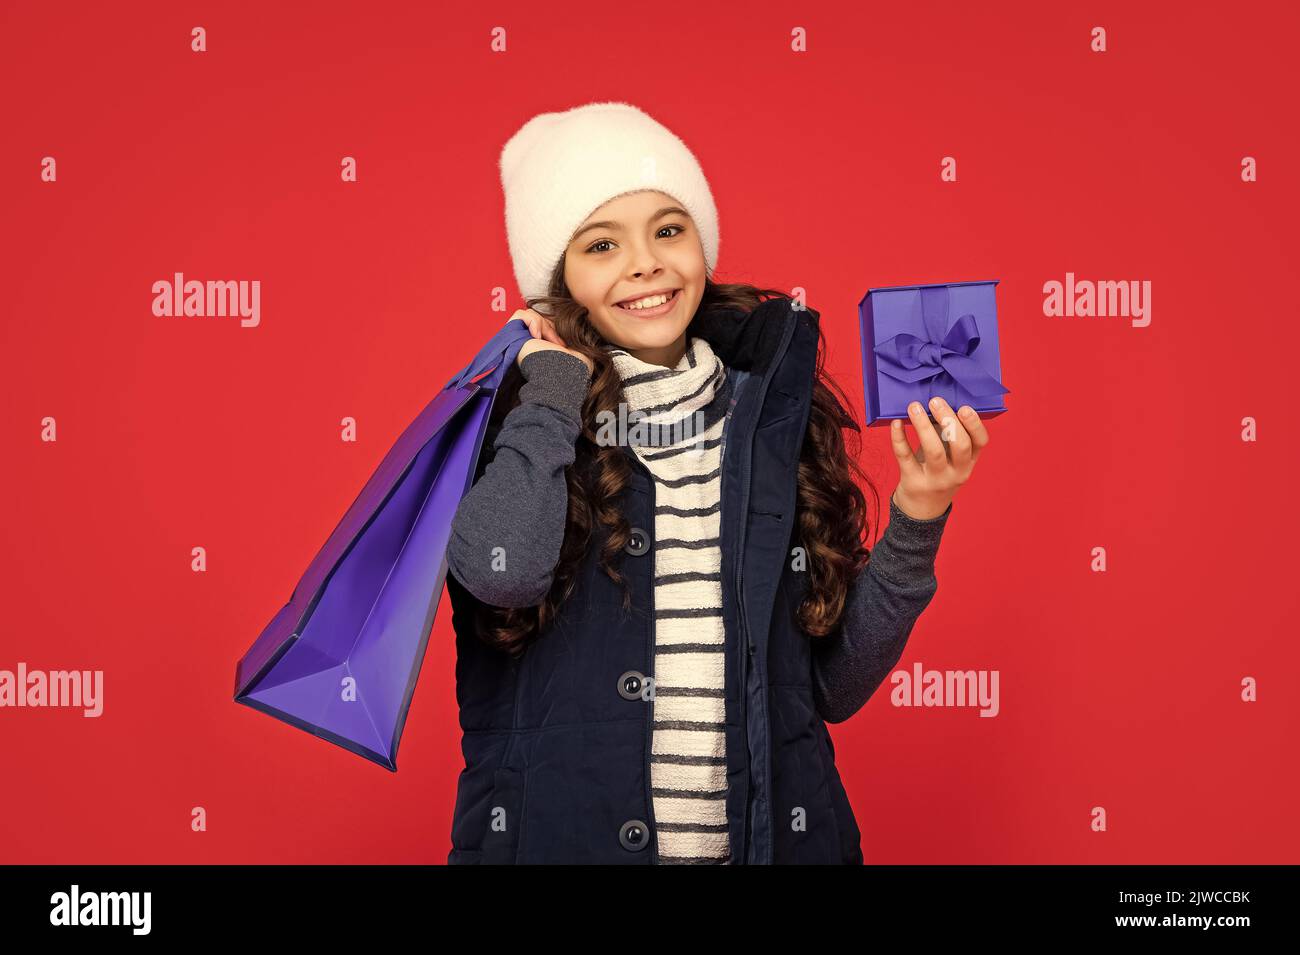 cheerful kid in puffer jacket and hat. teen girl after shopping on red background. Stock Photo